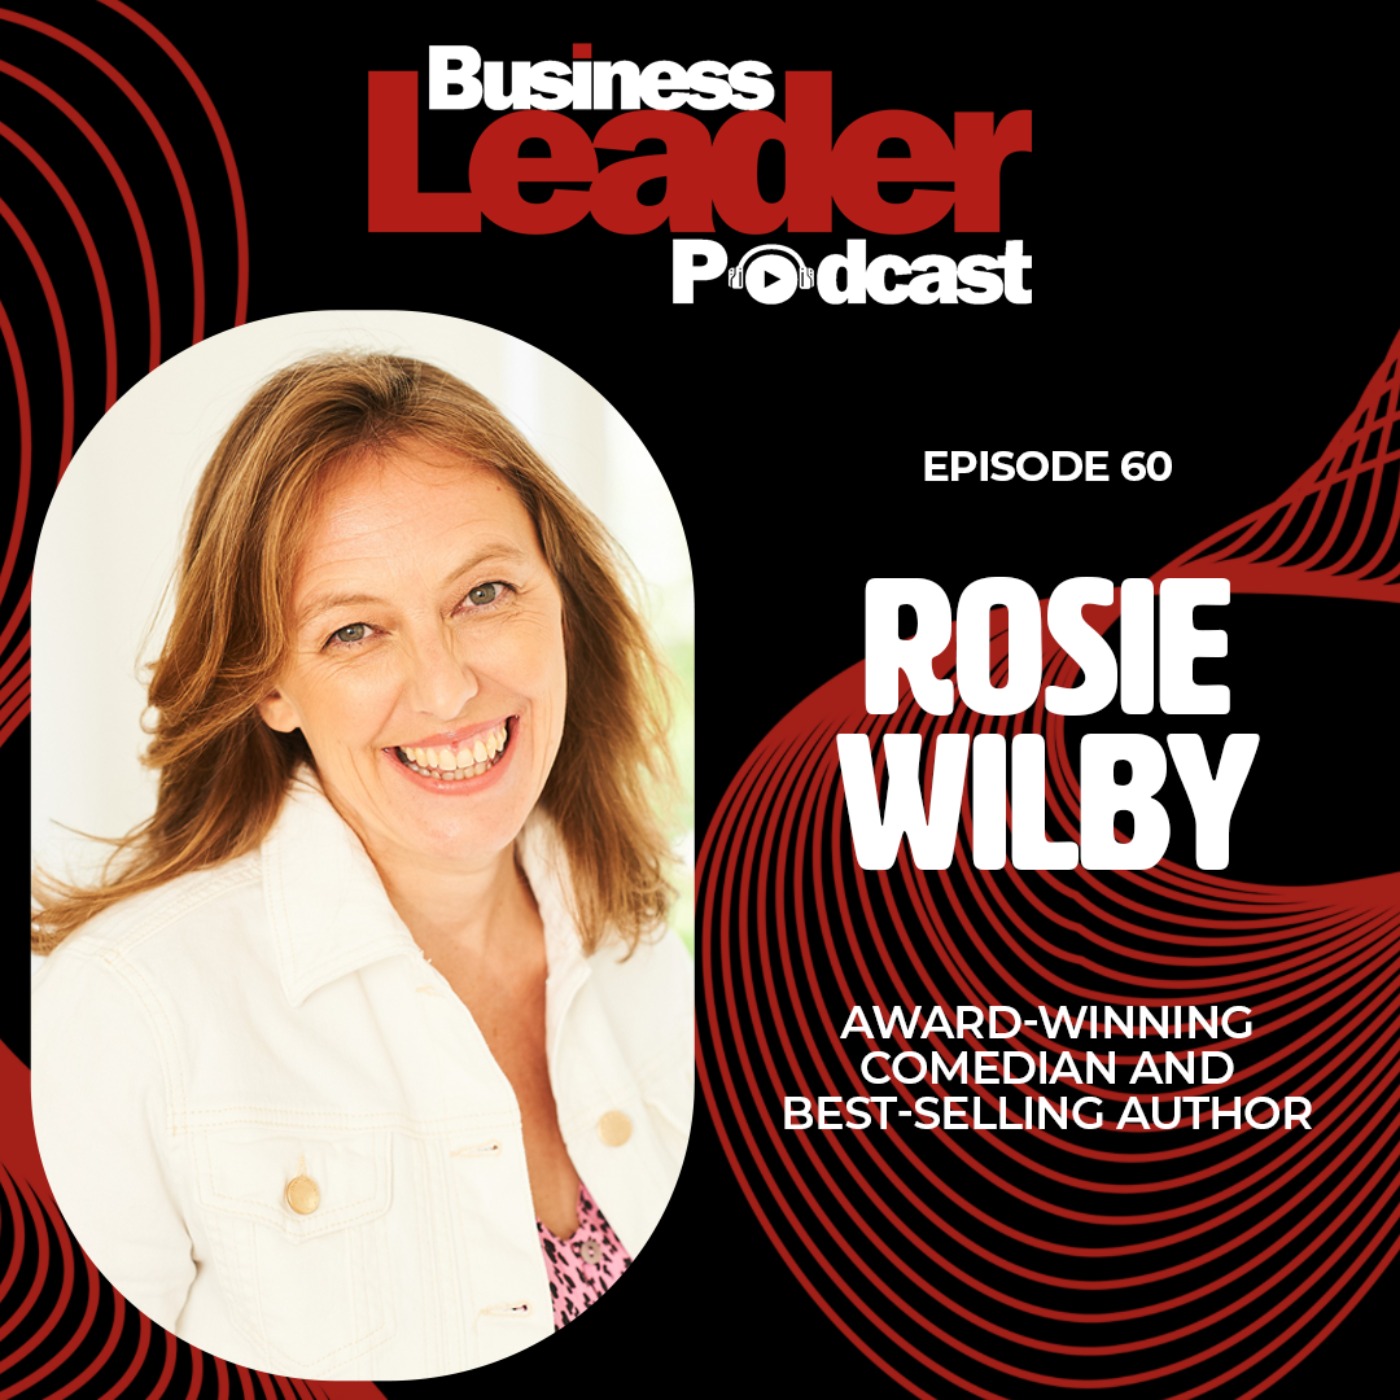 Rosie Wilby: Gaining business skills from a break-up